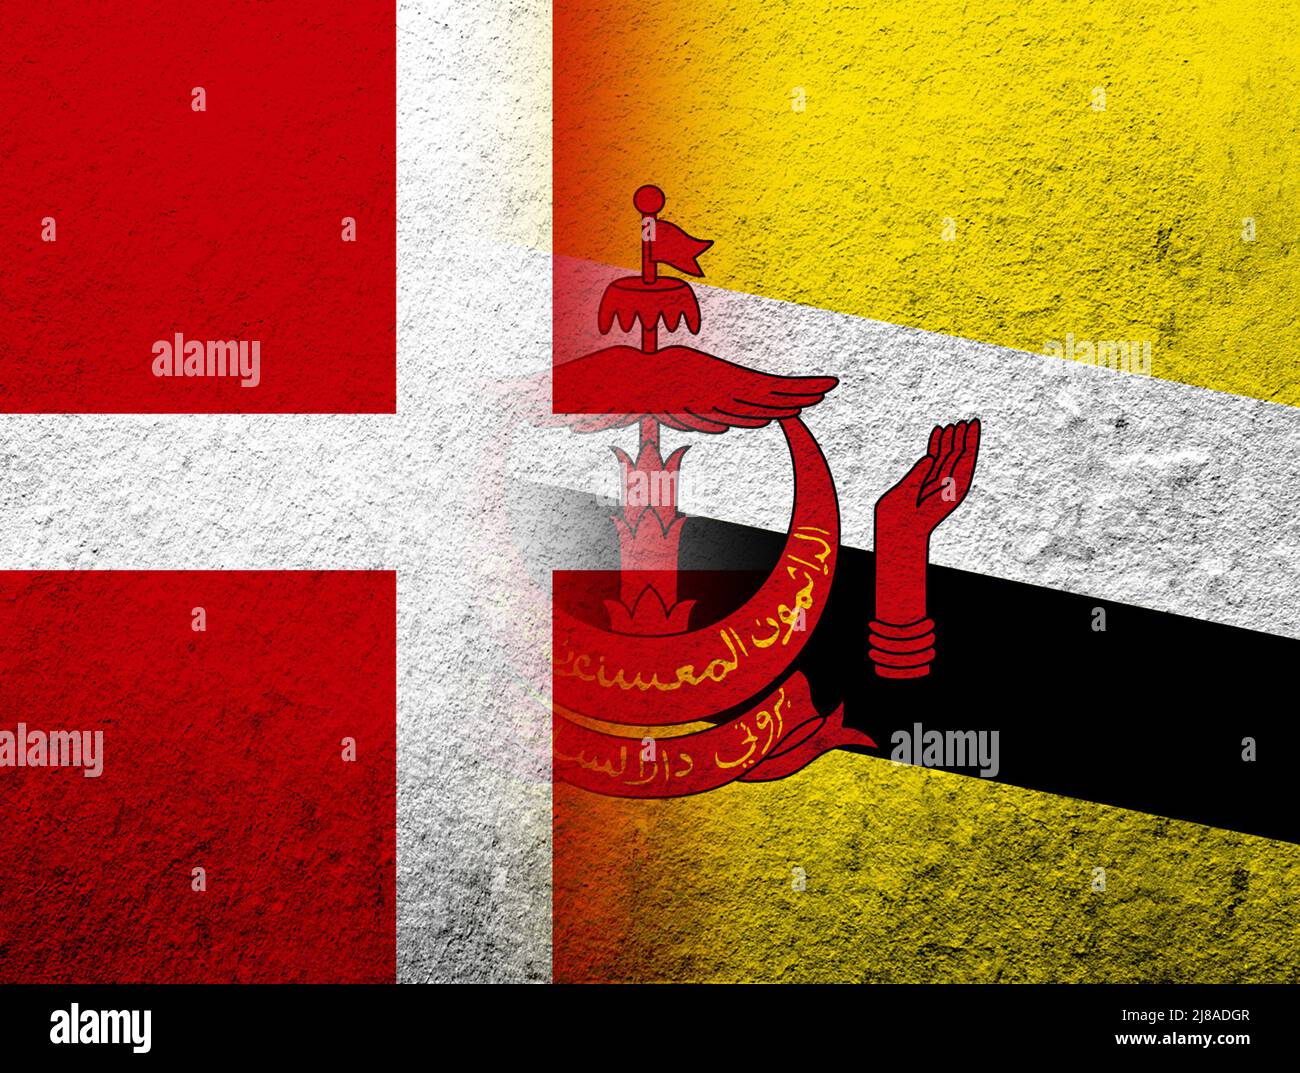 the Kingdom of Denmark National flag with the Nation of Brunei, the Abode of Peace National flag. Grunge Background Stock Photo